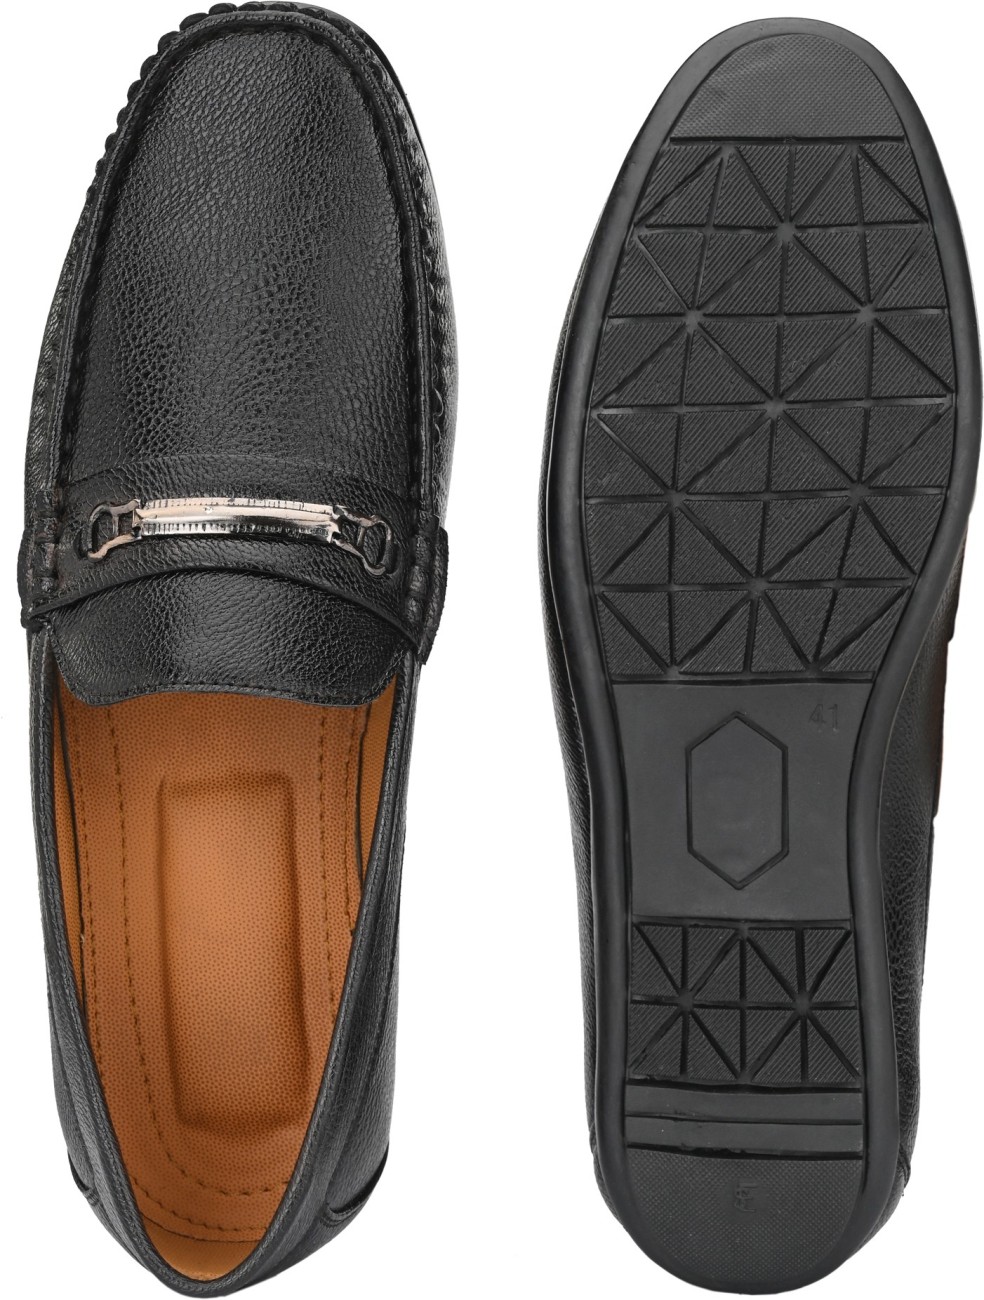 Buy Ariwa Stylish Loafers Shoes for Men (Mocaso Loafer) Black at